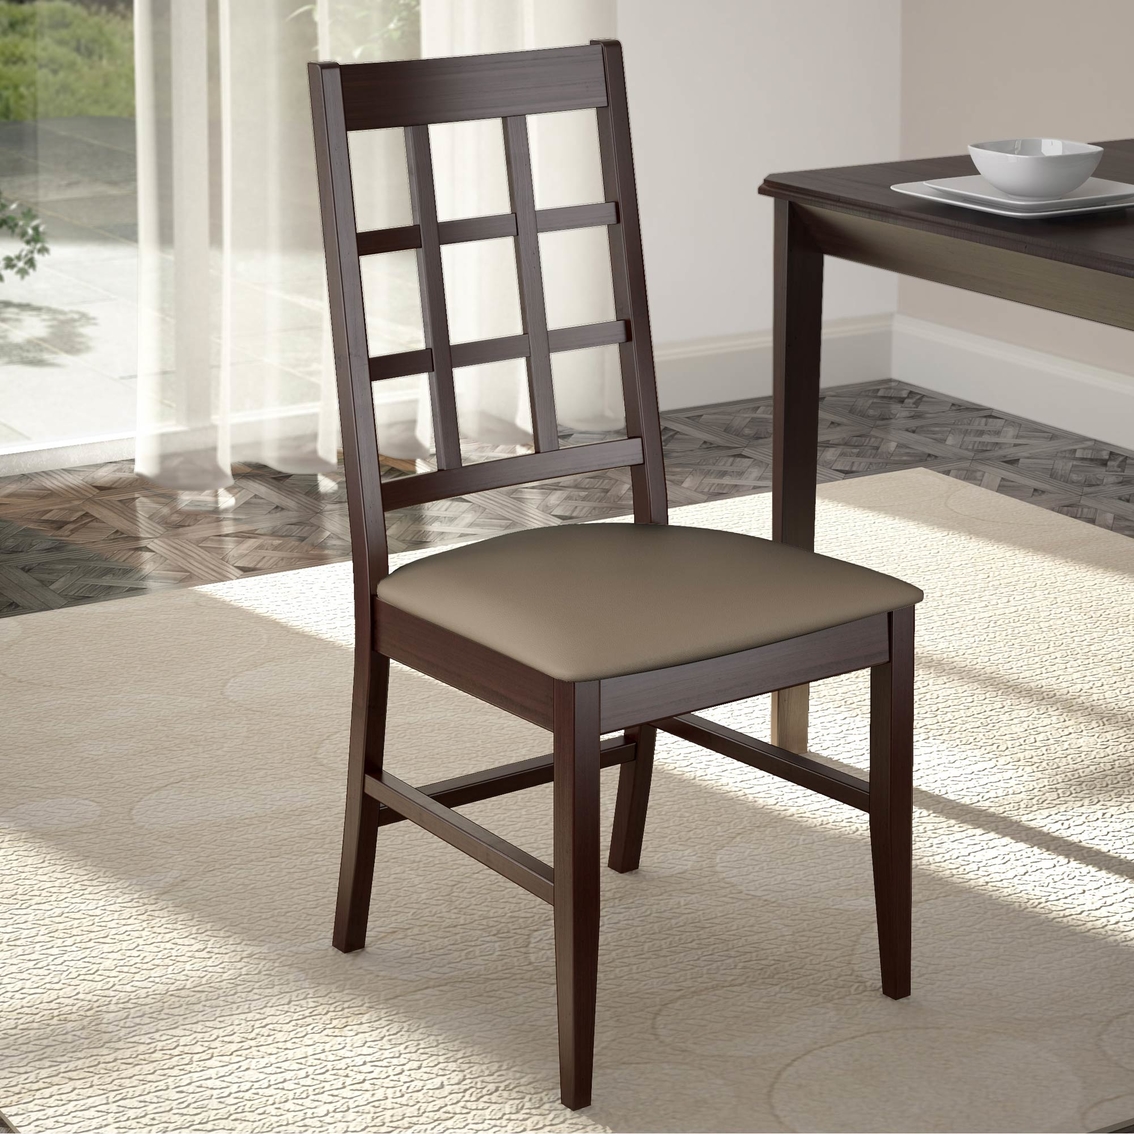 CorLiving Atwood Dining Chairs with Leatherette Seat 2 pk. - Image 4 of 4